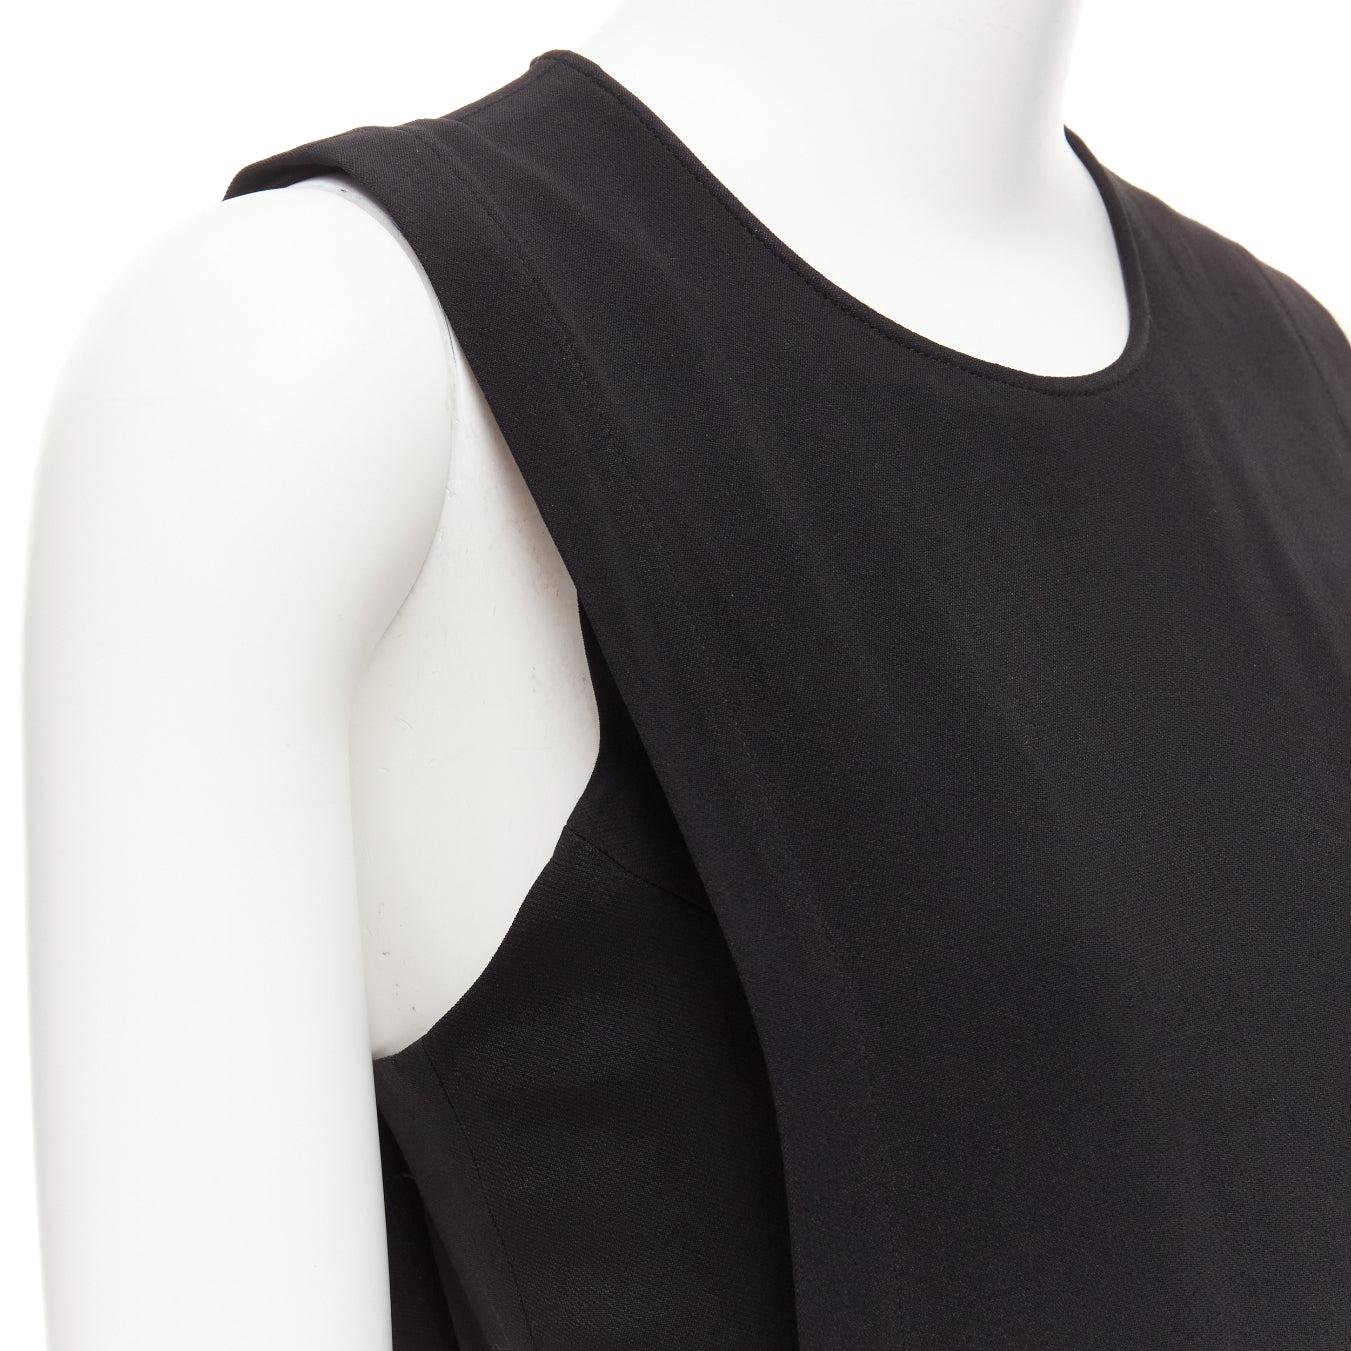 THEORY black layered top back zip cropped sleeveless jumpsuit US0 XS For Sale 2